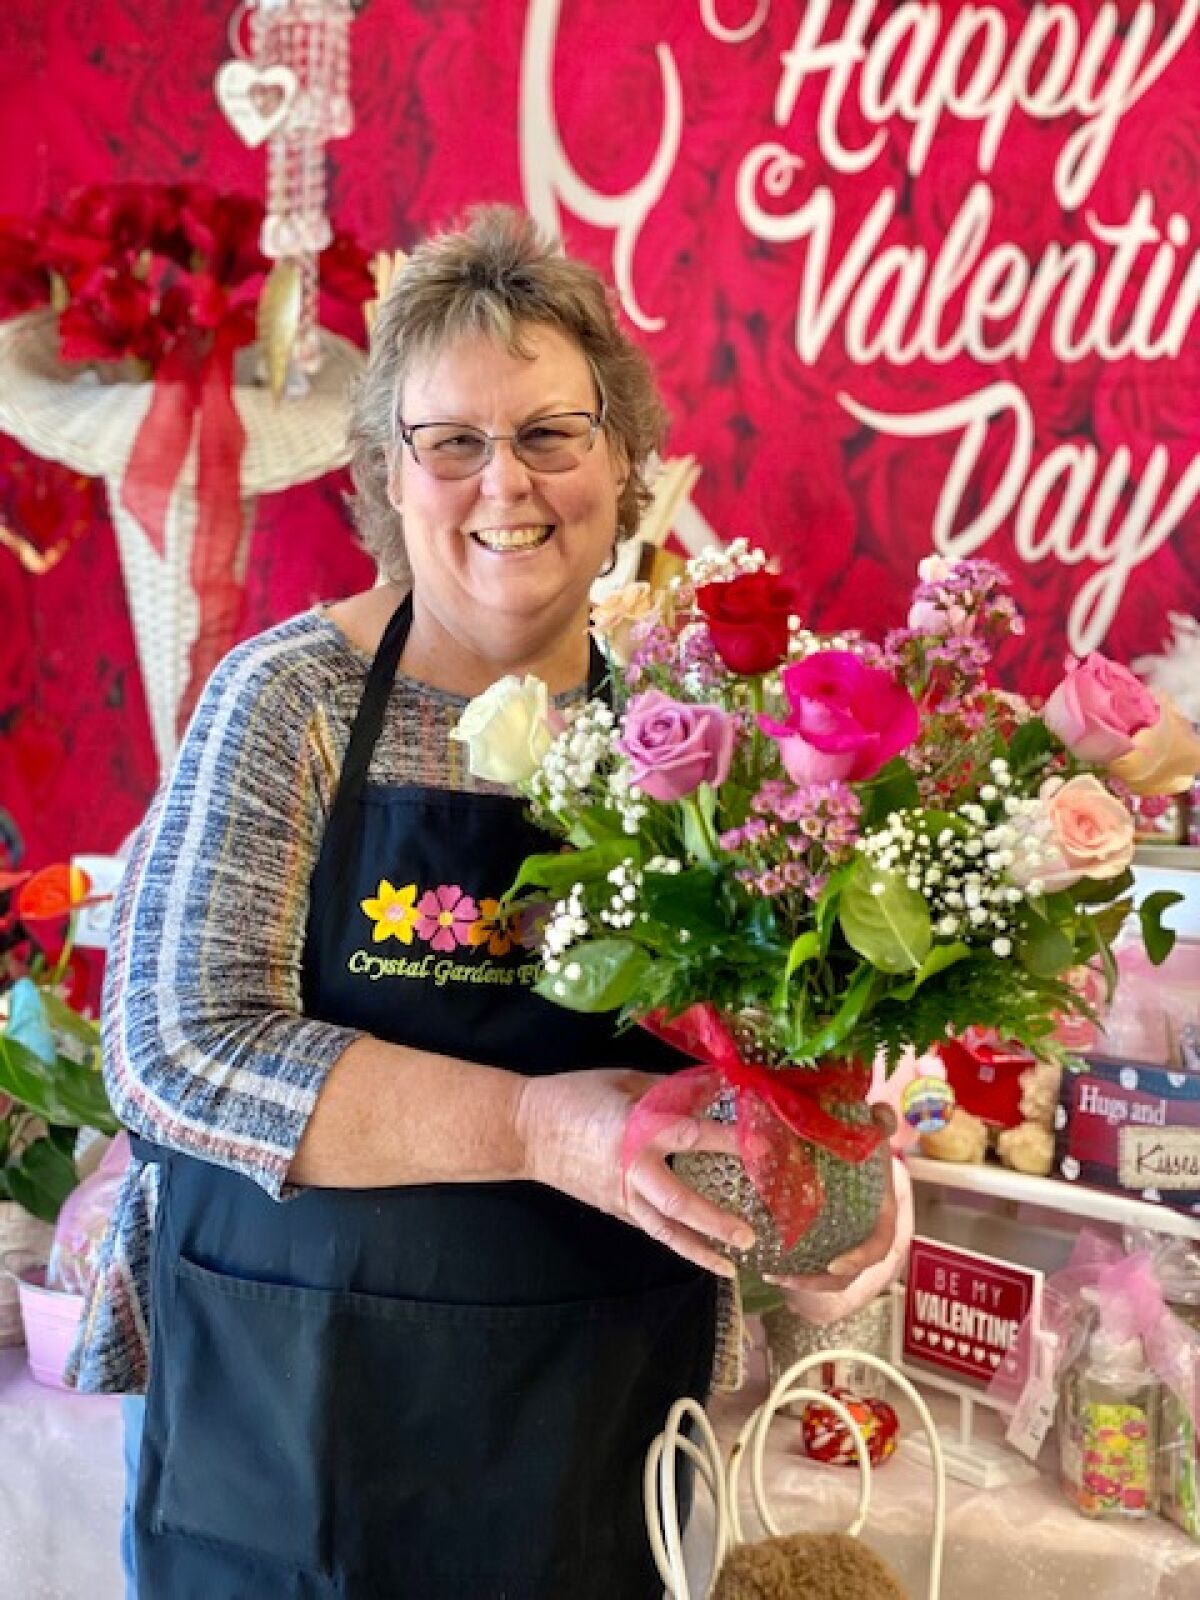 Jeannie Hume, owner of Crystal Gardens Florist in Poway, shows off a Valentine’s Day bouquet.